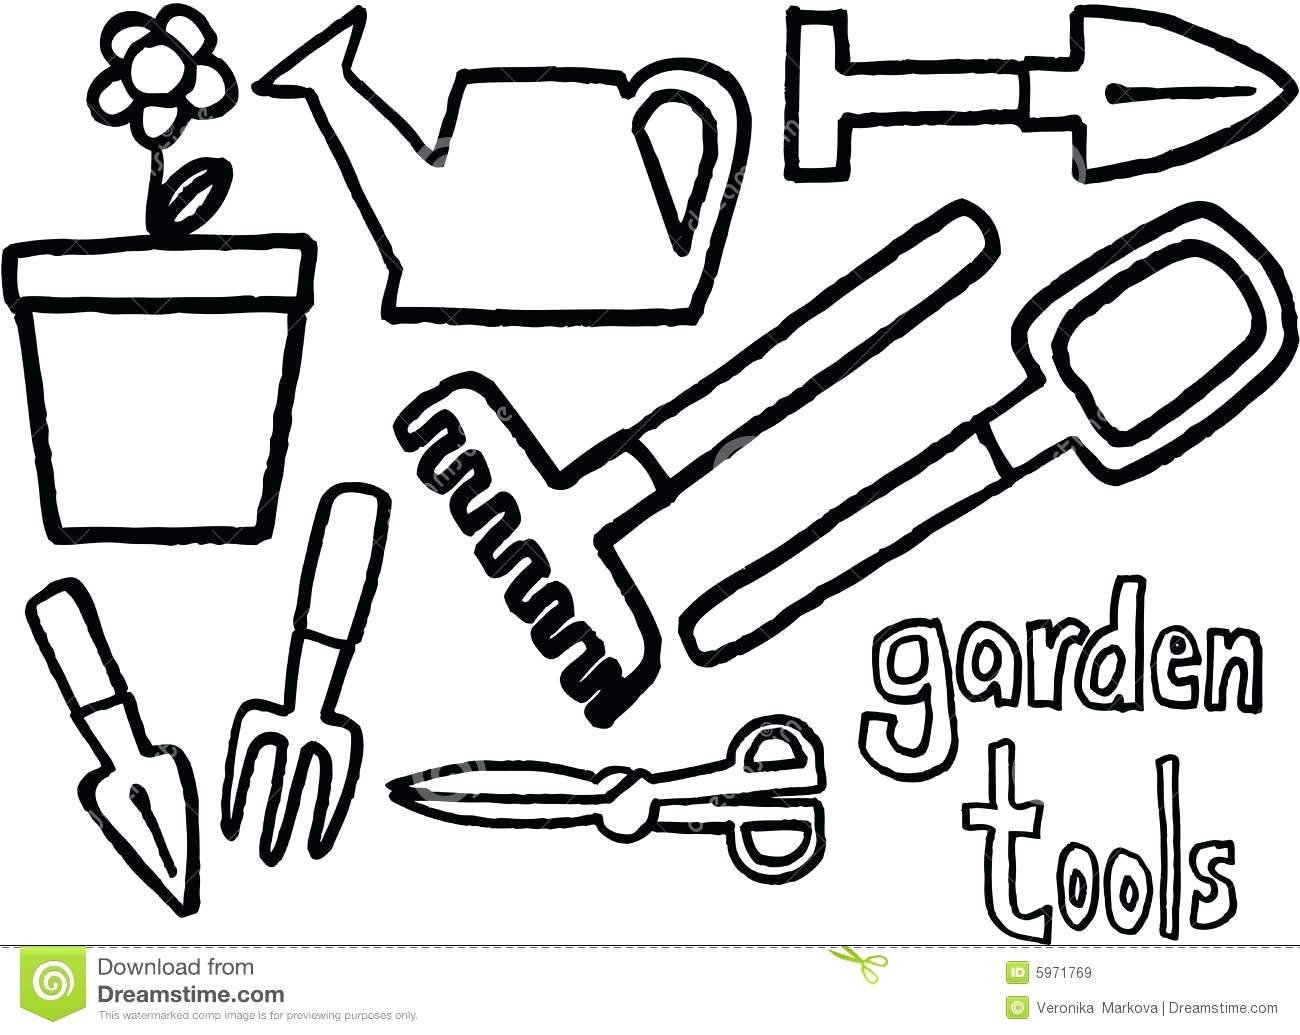 printable-construction-coloring-pages-printable-word-searches